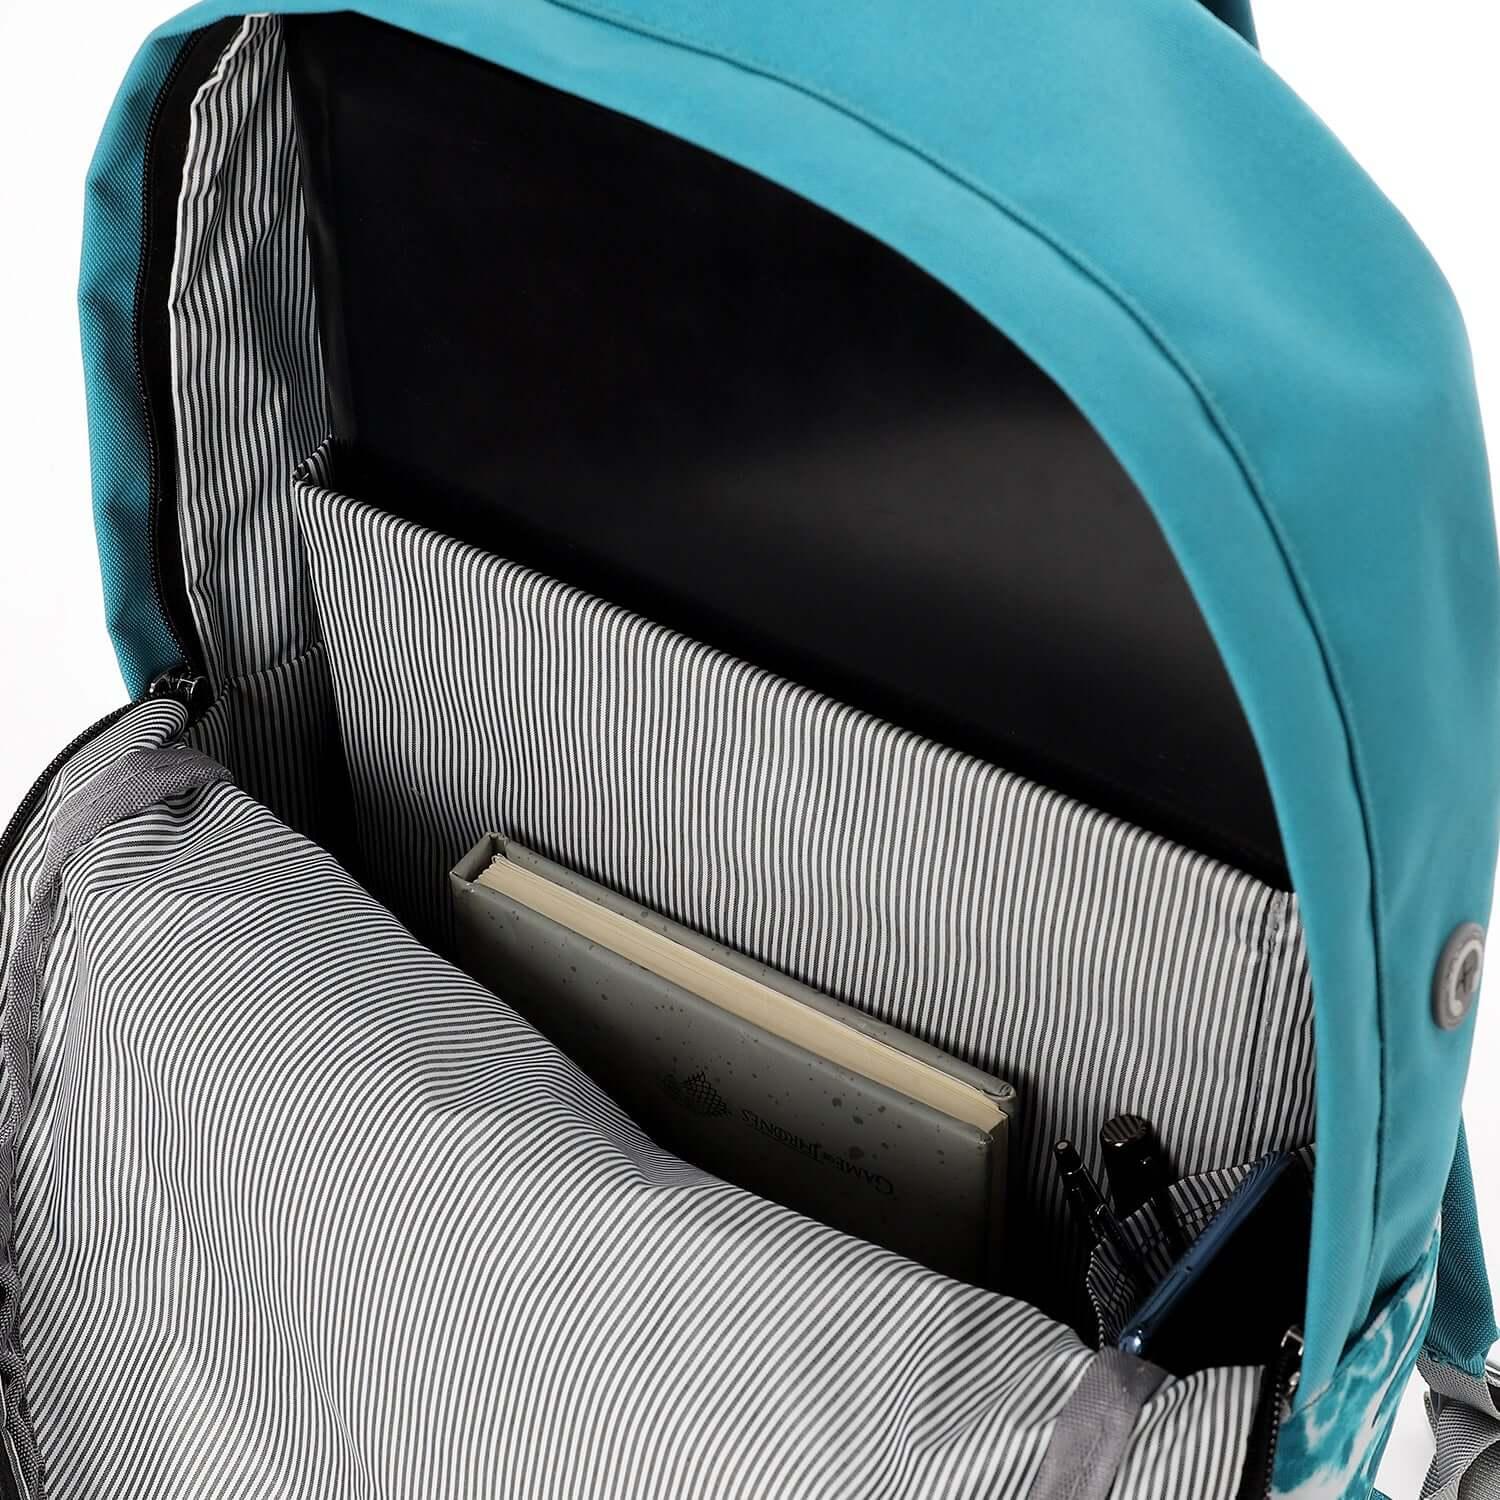 Force Daily Backpack 15.6" - Green - FG-GREEN-05 - FORCE STORES